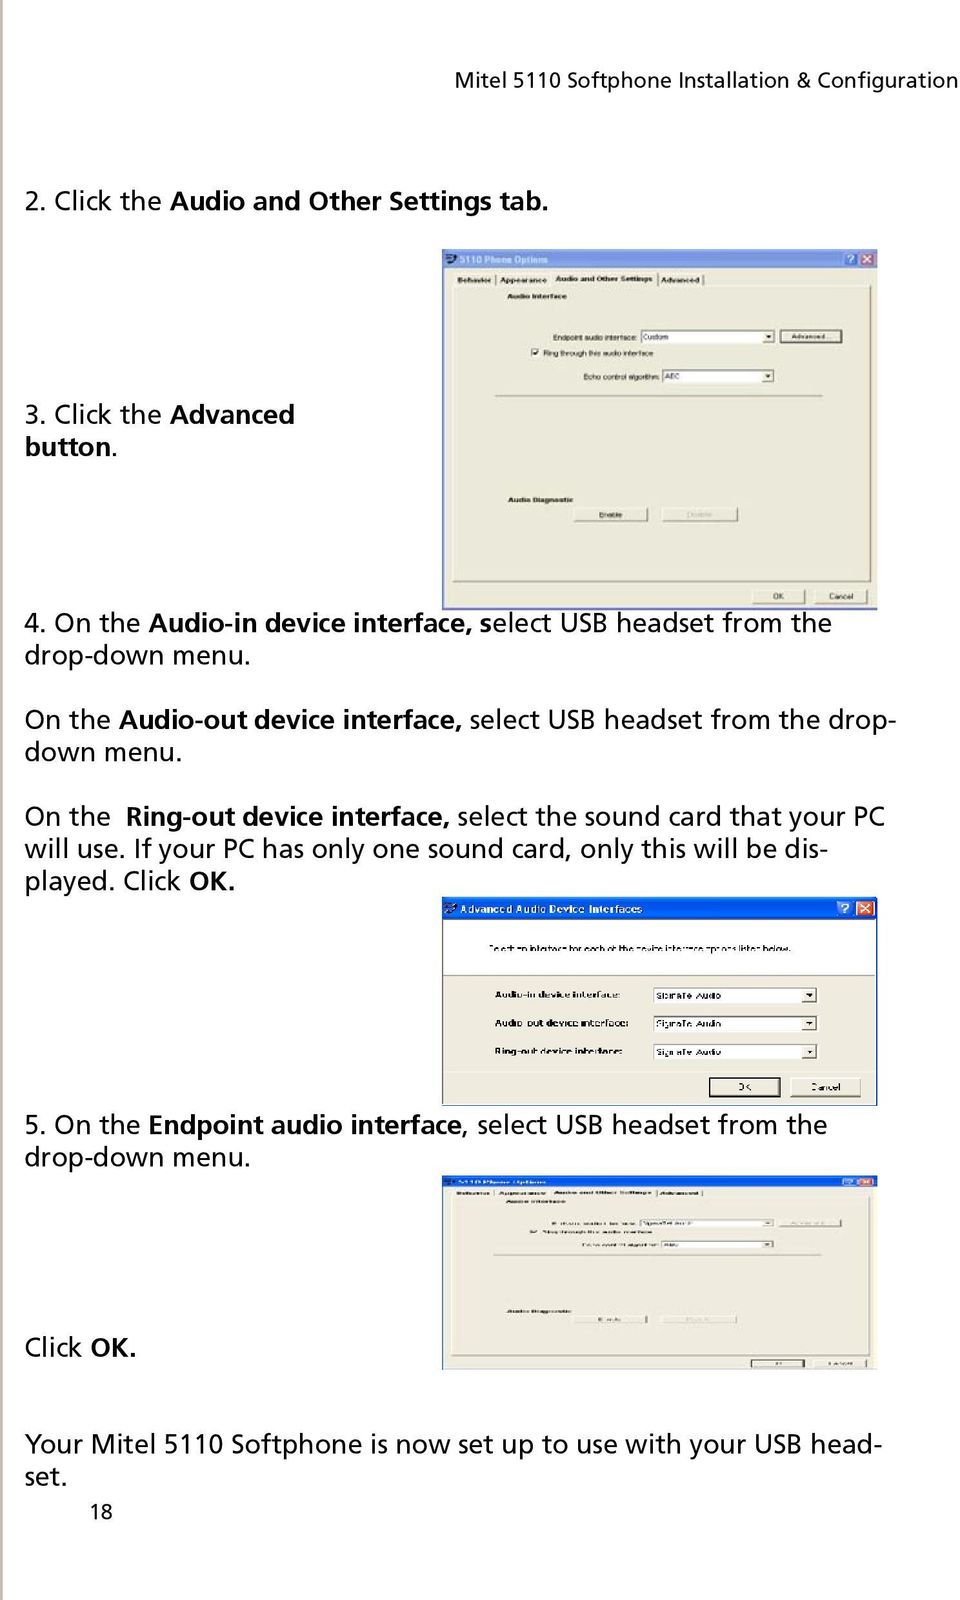 On the Audio-out device interface, select USB headset from the dropdown menu.